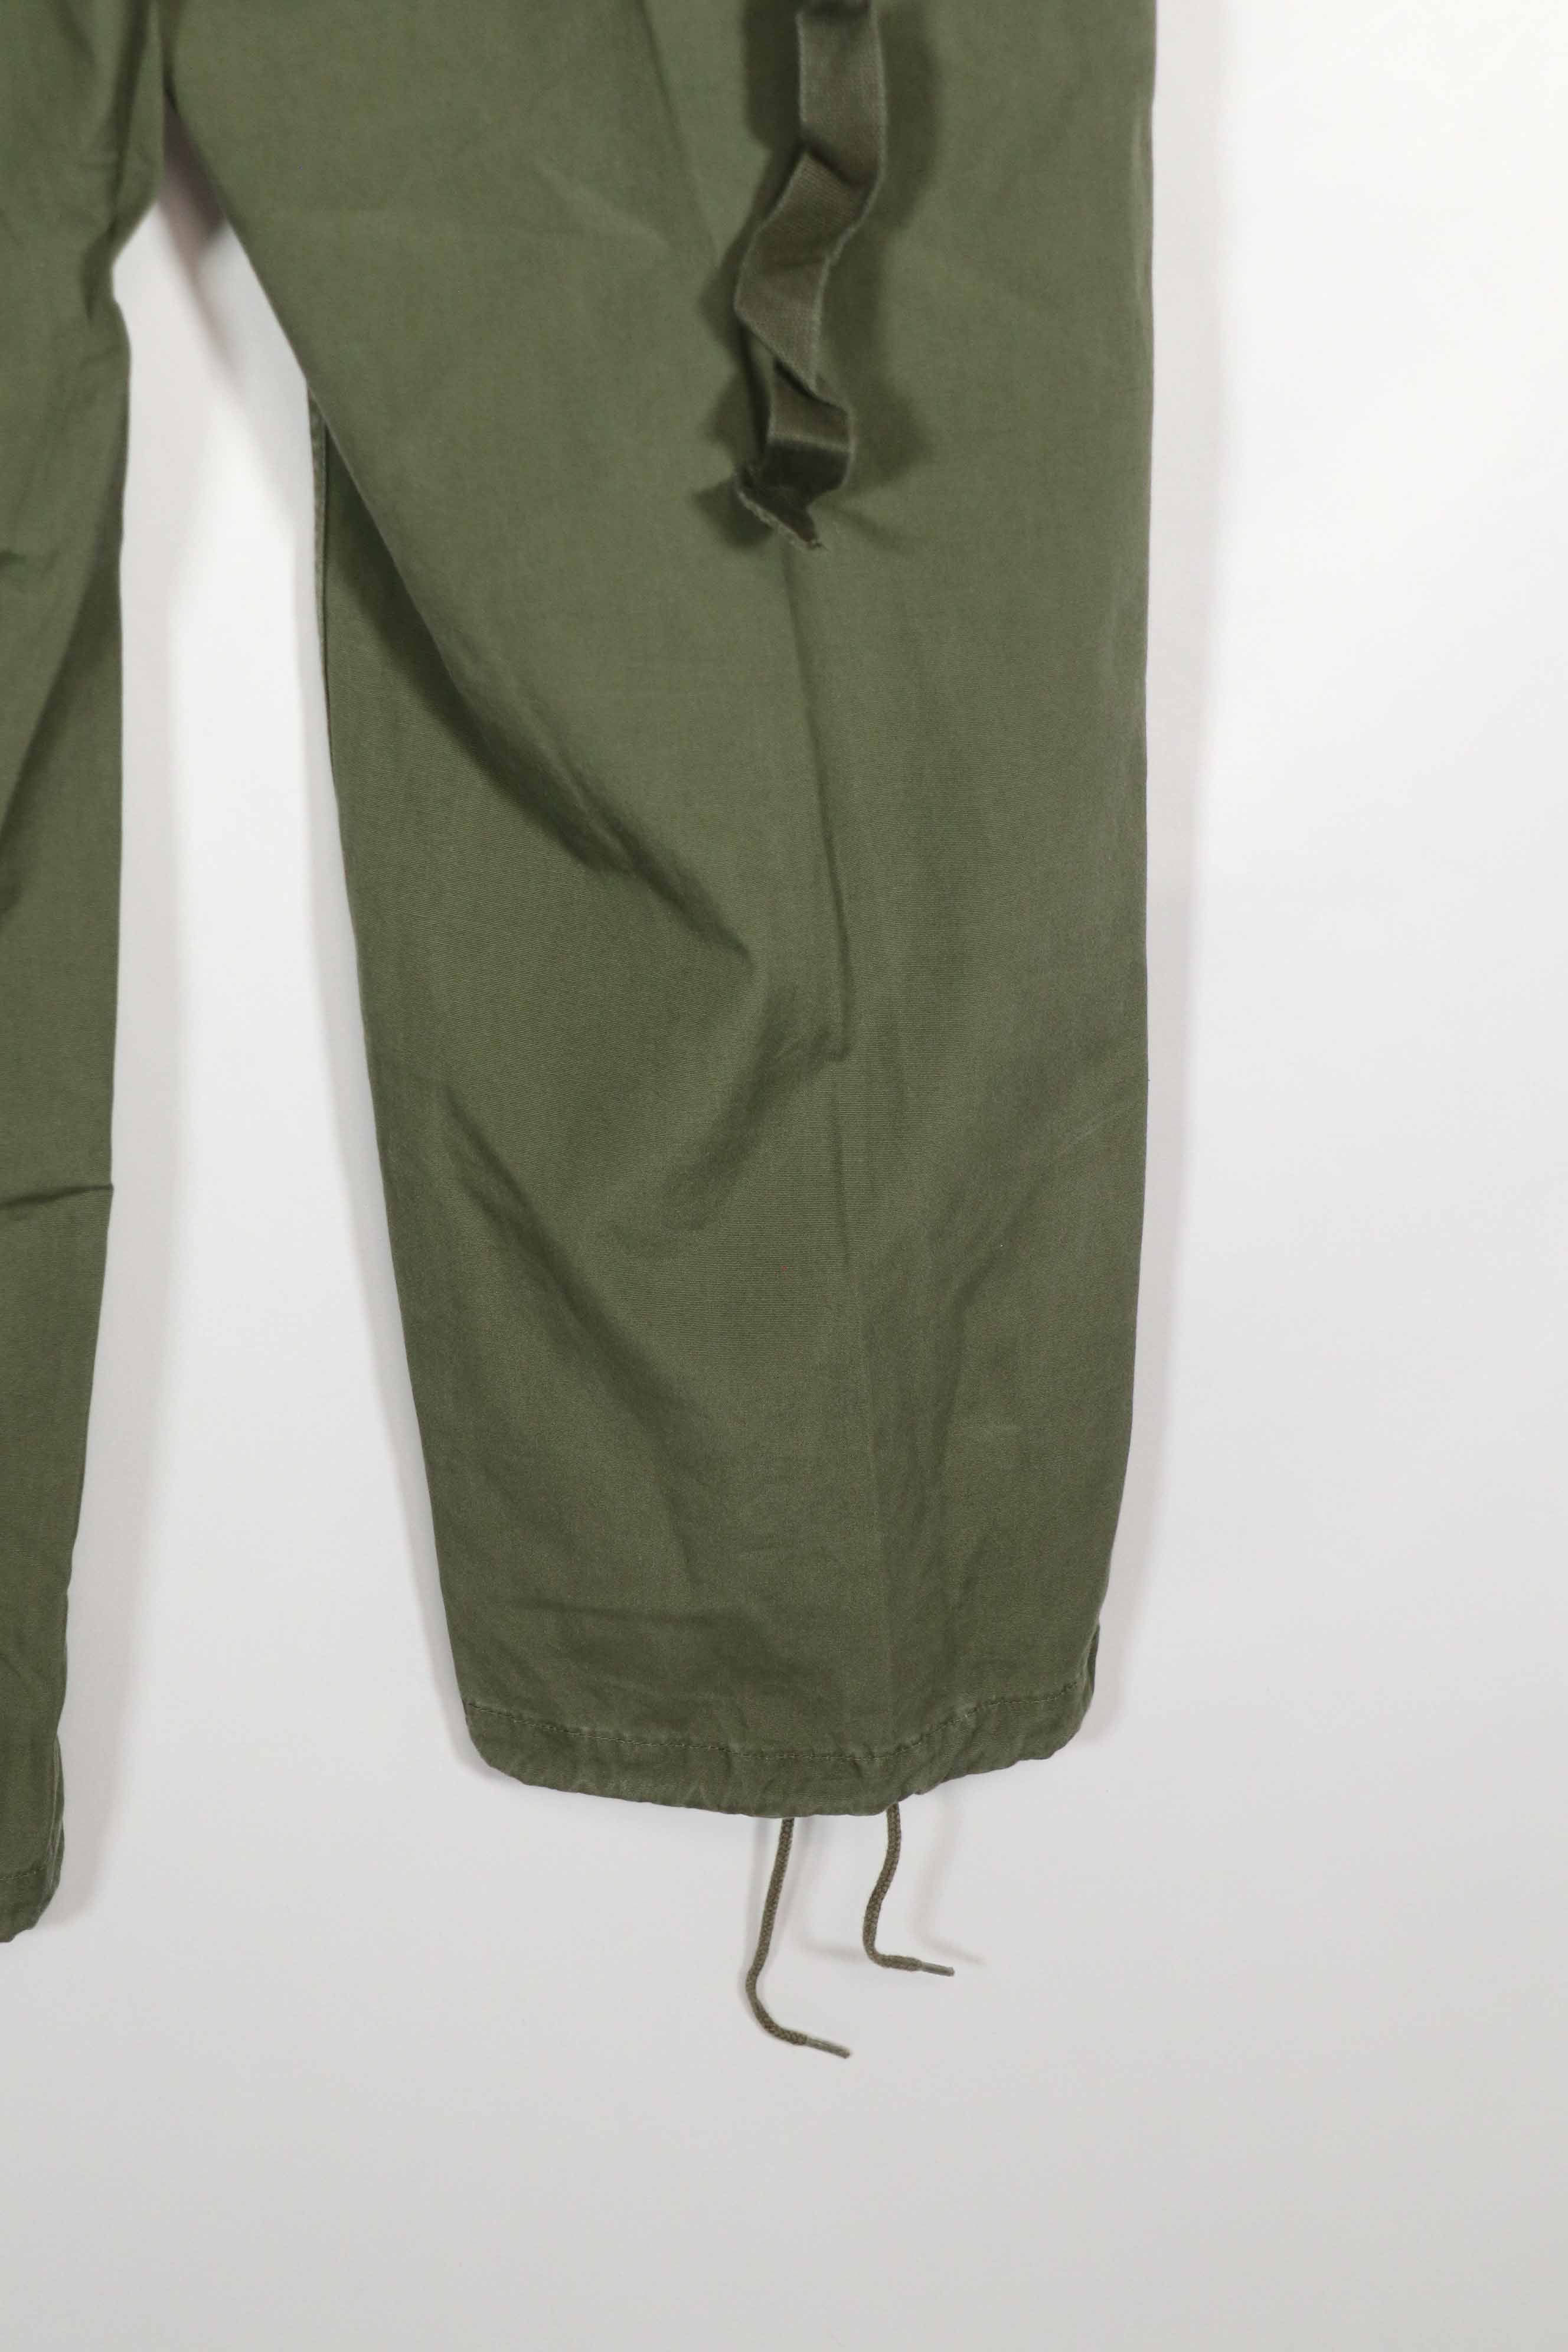 Real 1st Model Jungle Fatigue pants, large size, used.